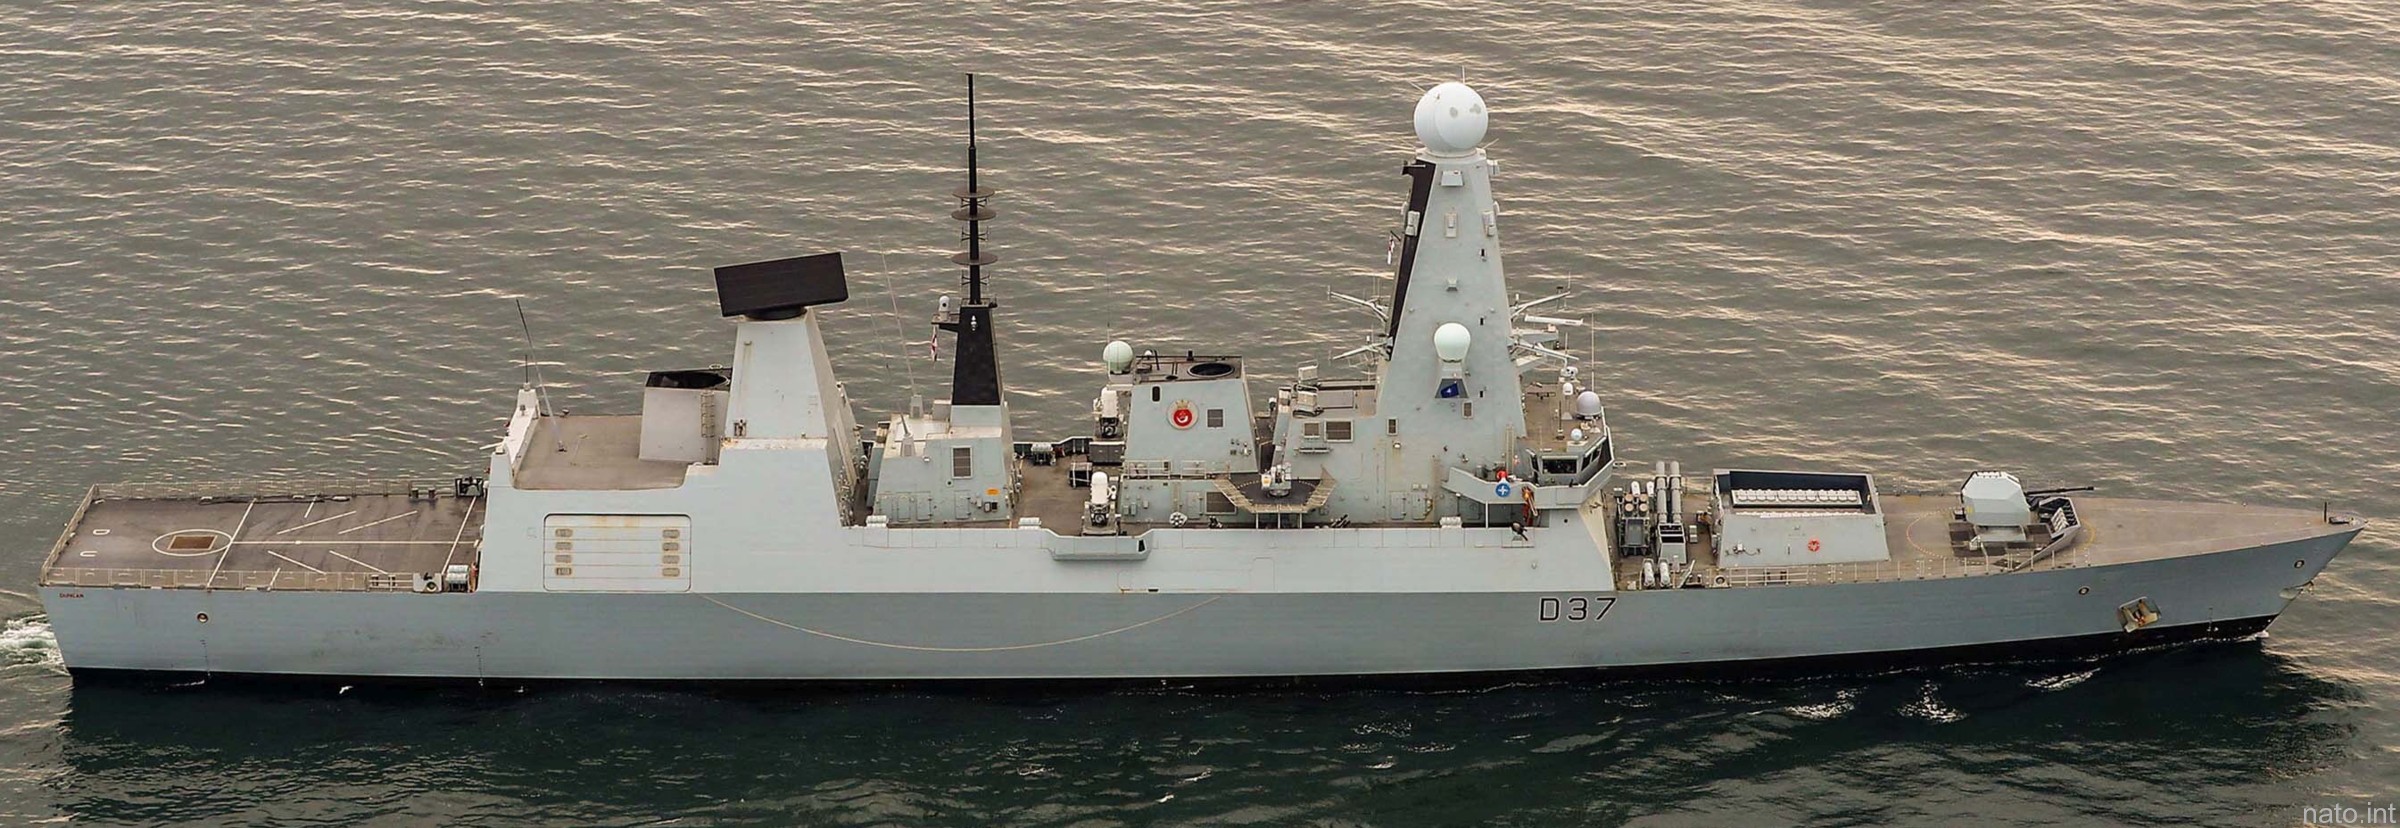 hms duncan d-37 type 45 daring class guided missile destroyer ddg royal navy sea viper paams 37